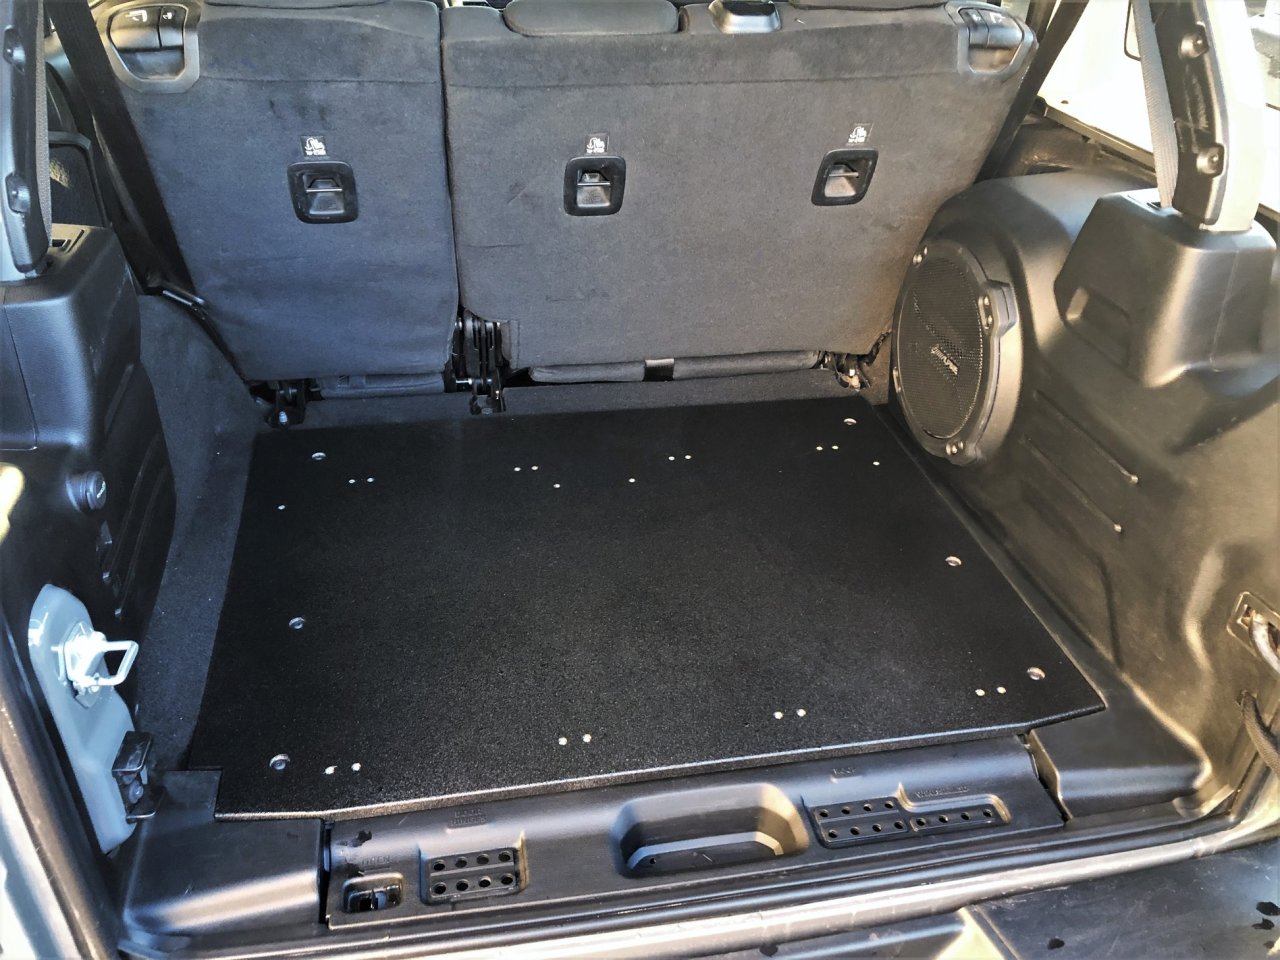 DirtBox has designed its initial base plates specifically for Wrangler JKU and JLU models; additional vehicle models will be supported in the future